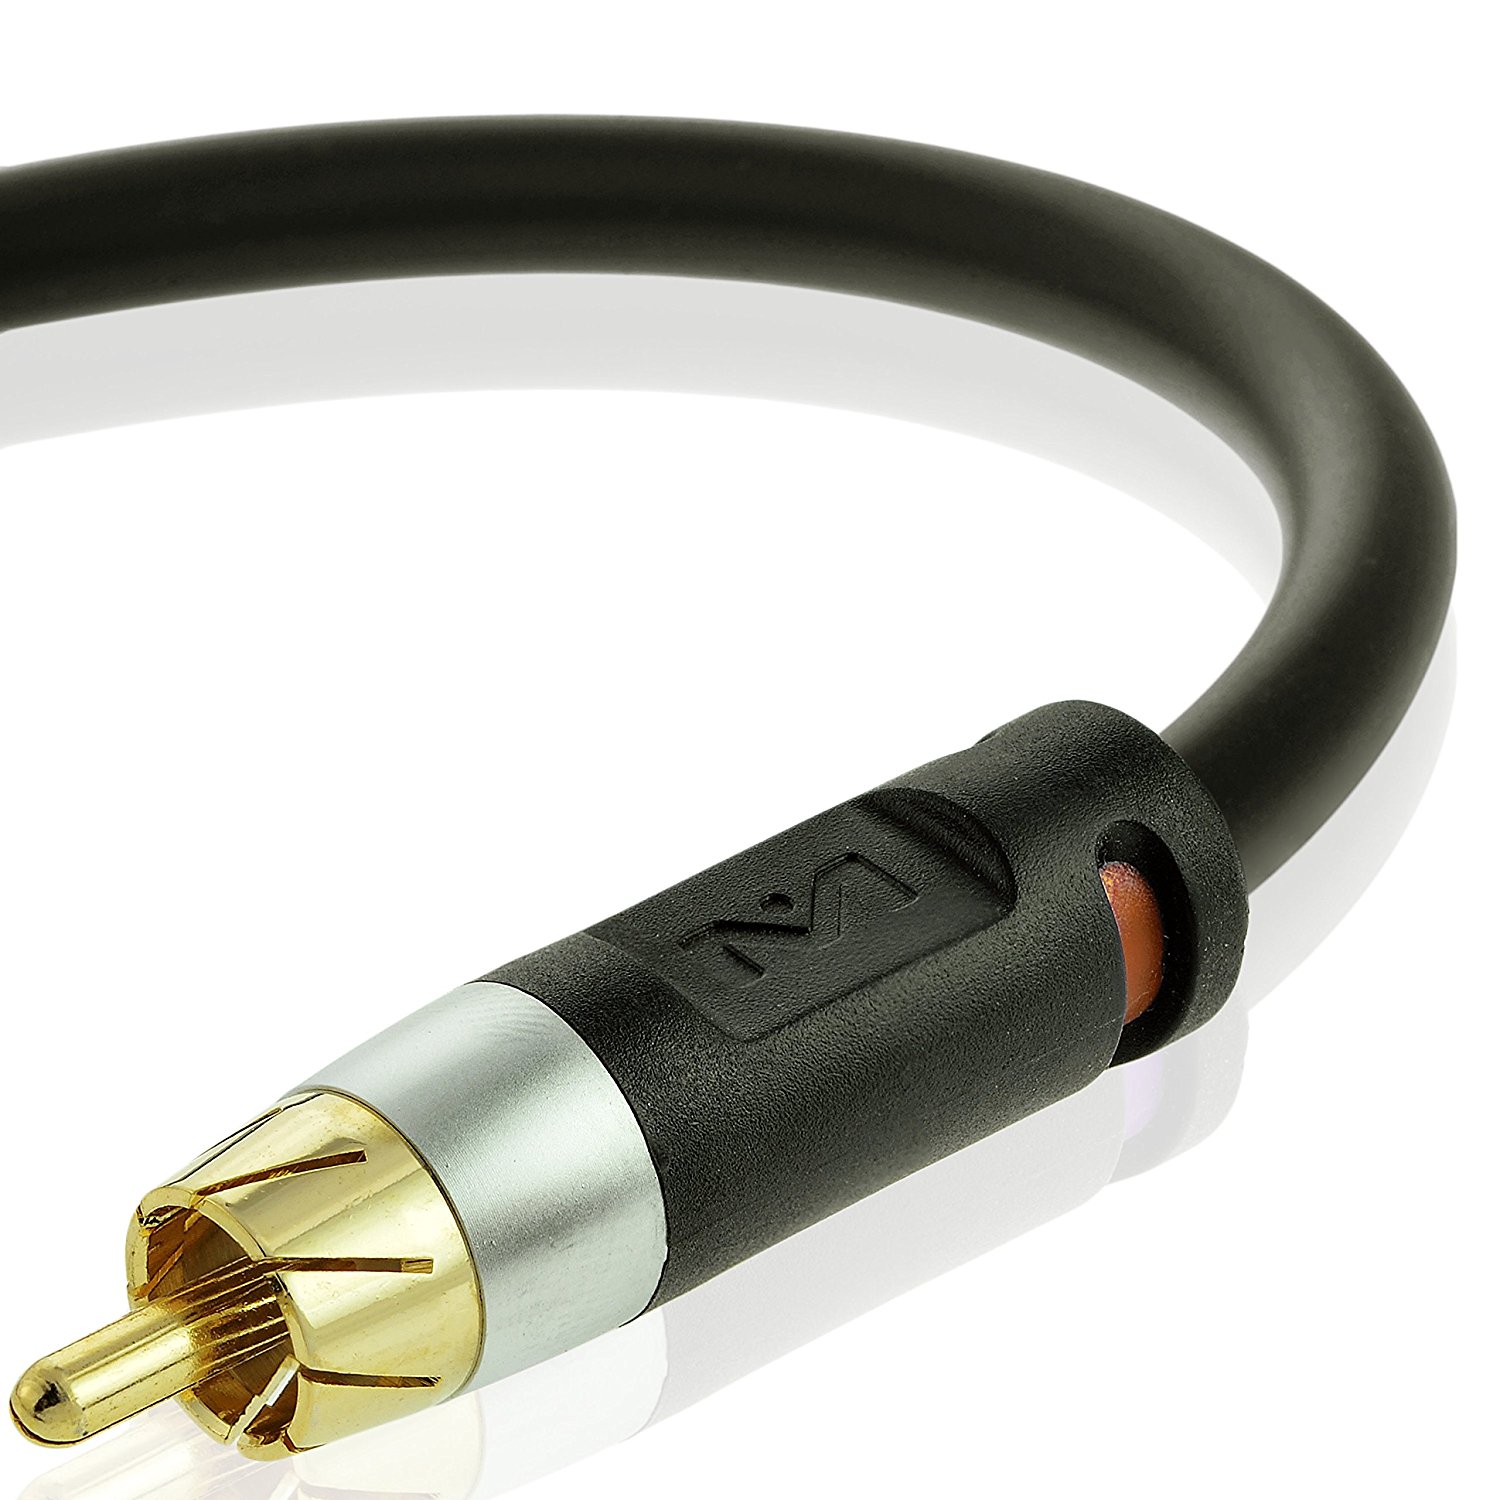 Mediabridge ULTRA Series Digital Audio Coaxial Cable (8 Feet) - Dual Shielded with RCA to RCA Gold-Plated Connectors - Black - (Part# CJ08-6BR-G2 ) - image 1 of 4